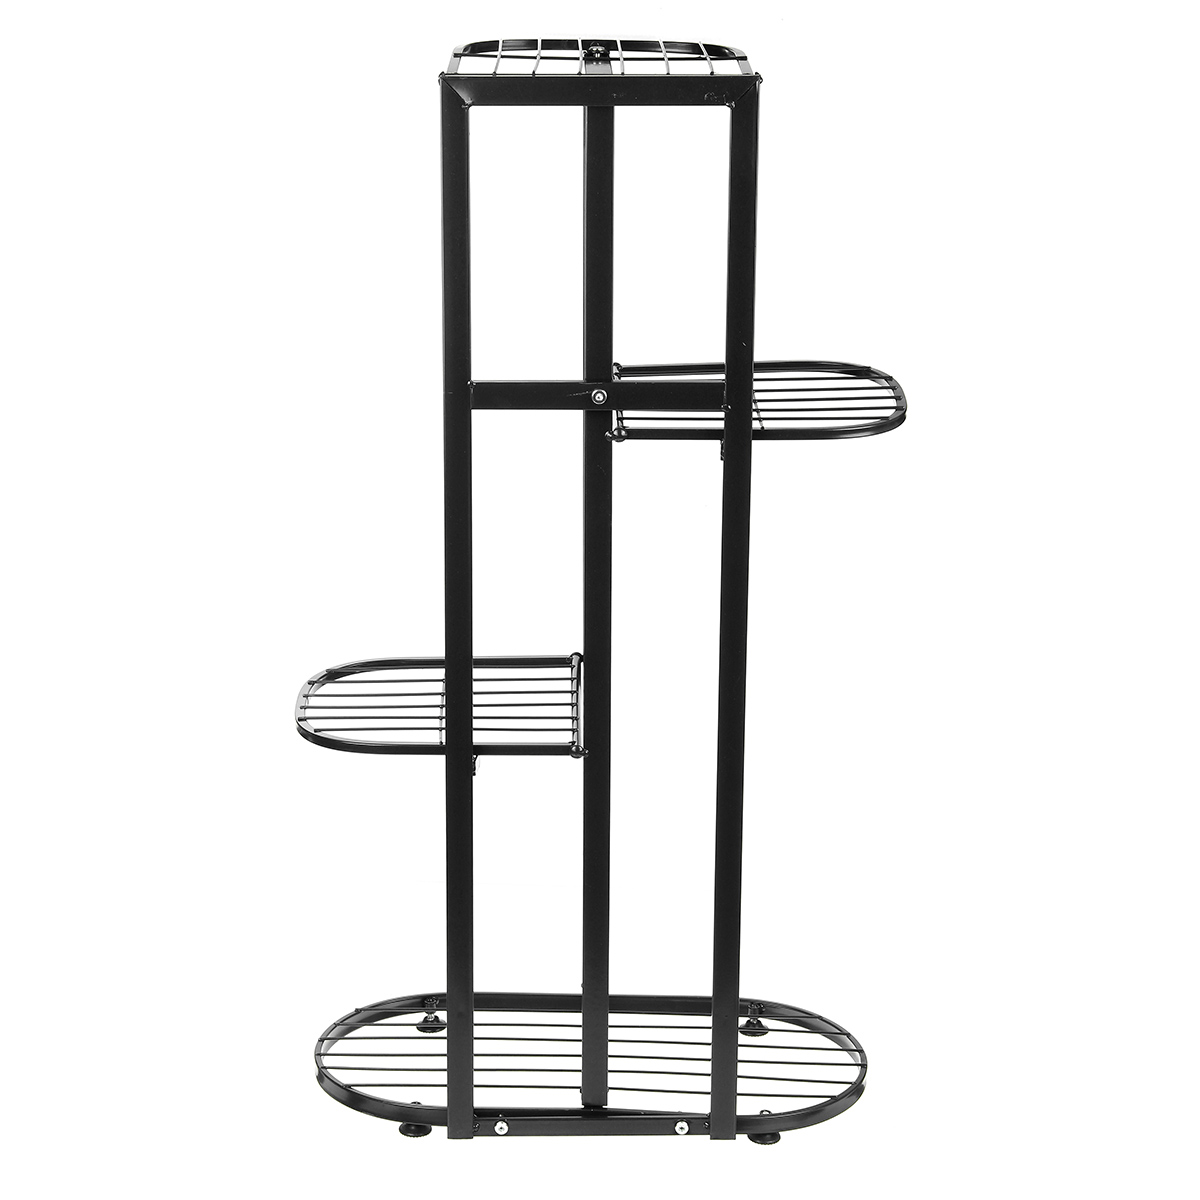 Find 4 Tire Metal Plant Stand Display Shelf Home Garden Ornaments Indoor /Outdoor for Sale on Gipsybee.com with cryptocurrencies